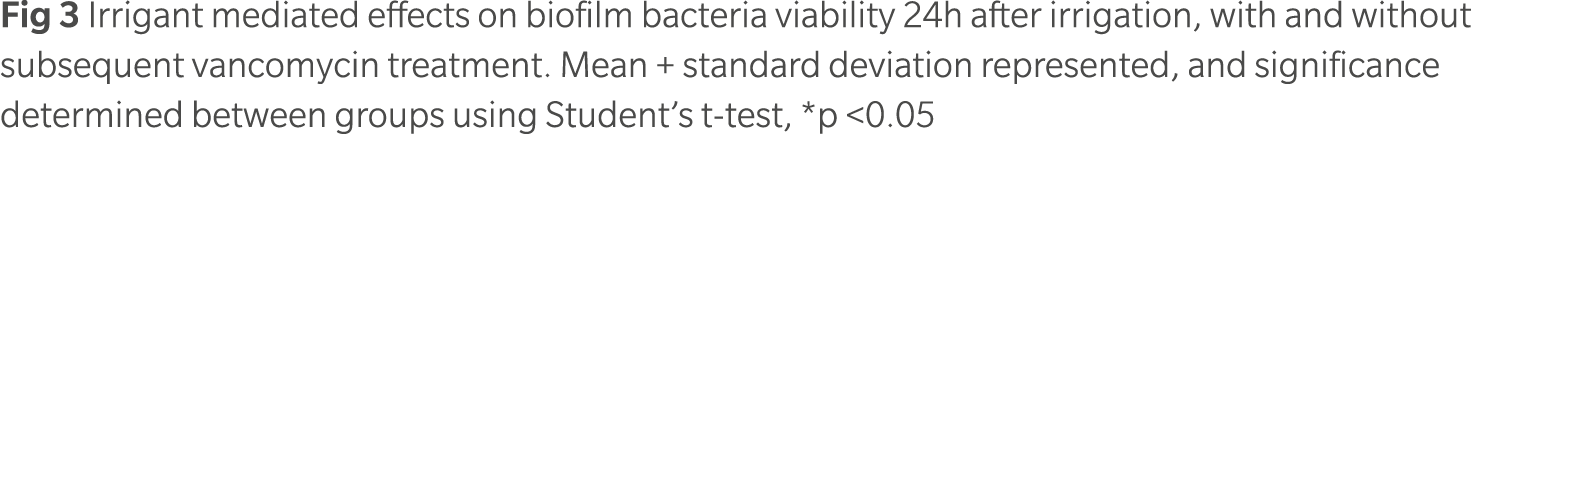 Fig 3 Irrigant mediated effects on biofilm bacteria viability 24h after irrigation, with and without subsequent vanco...